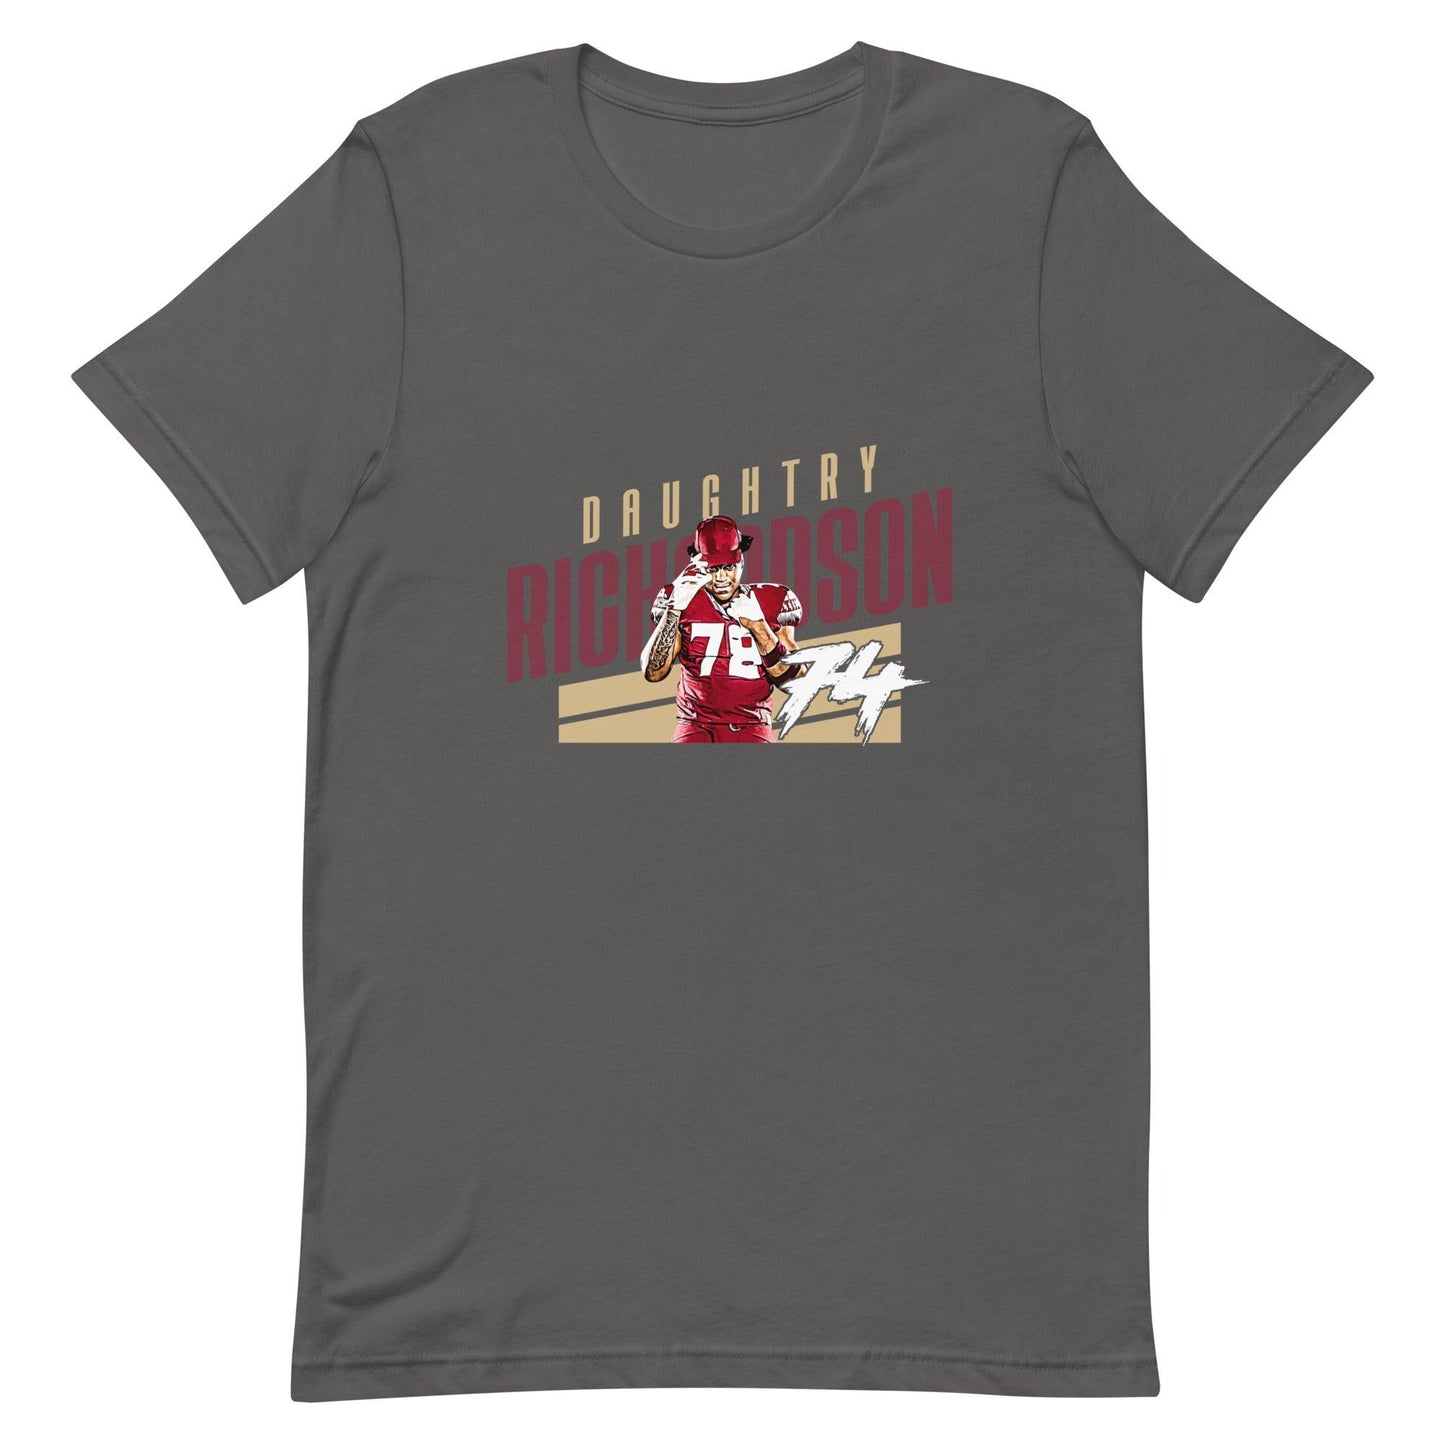 Daughtry Richardson "Gameday" t-shirt - Fan Arch